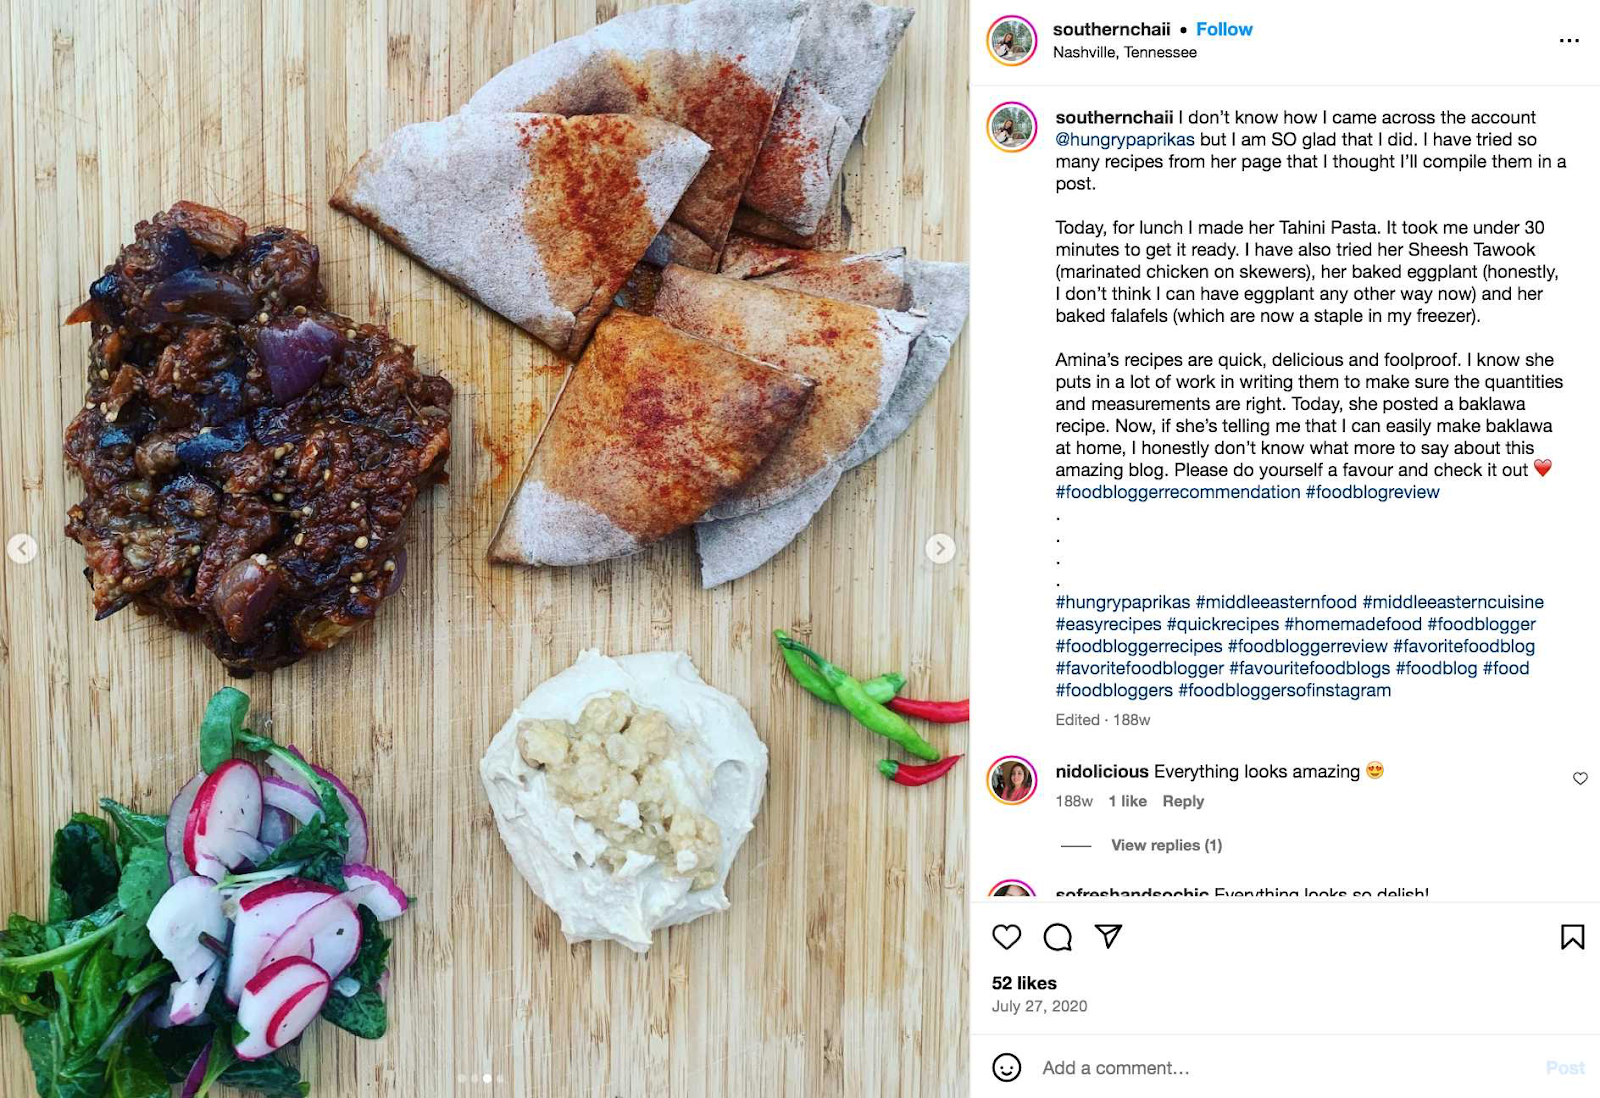 @southernchaii Instagram station  mentioning a look    from the nutrient  blog Hungry Paprikas